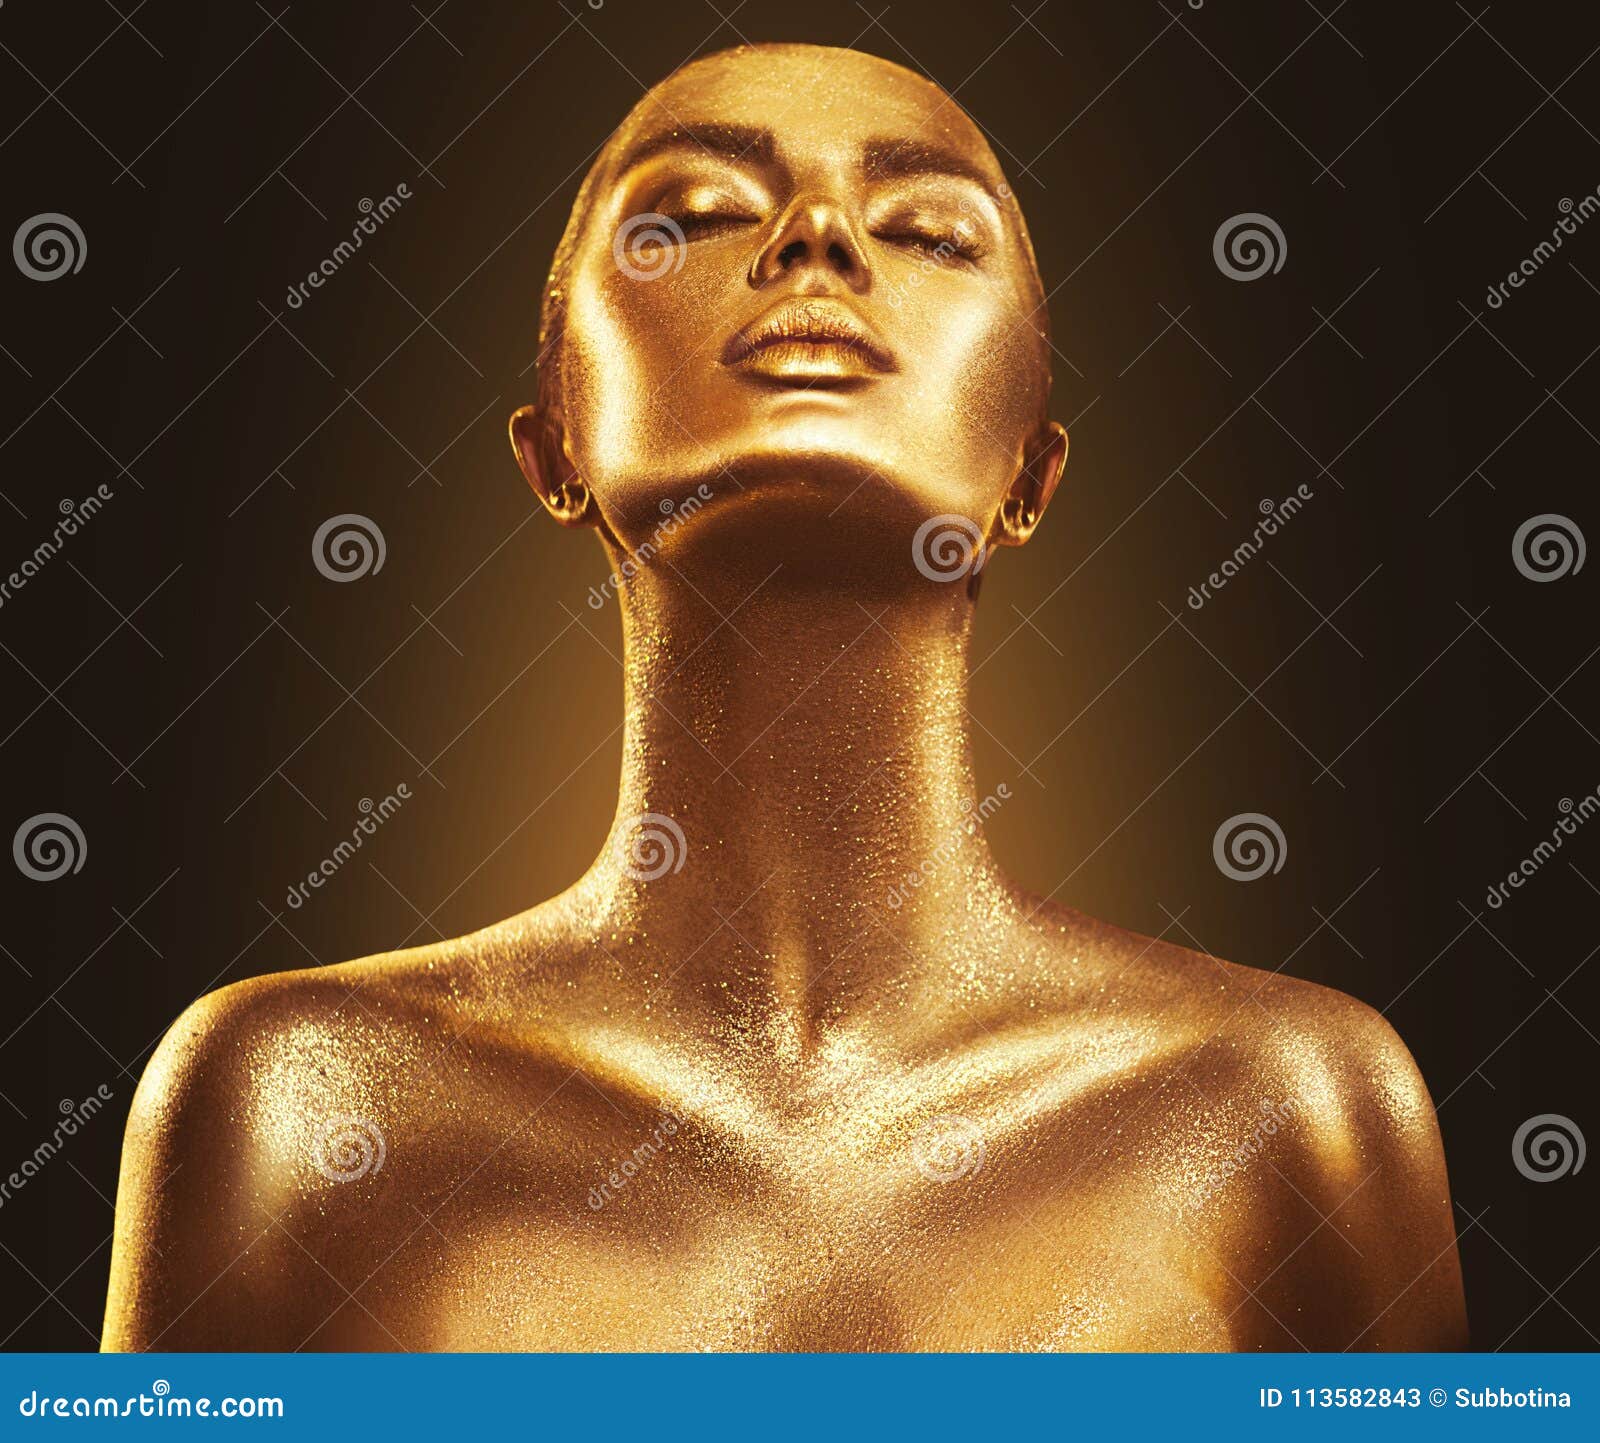 Body Art. Woman painting Body with Paint Brush in Golden Color